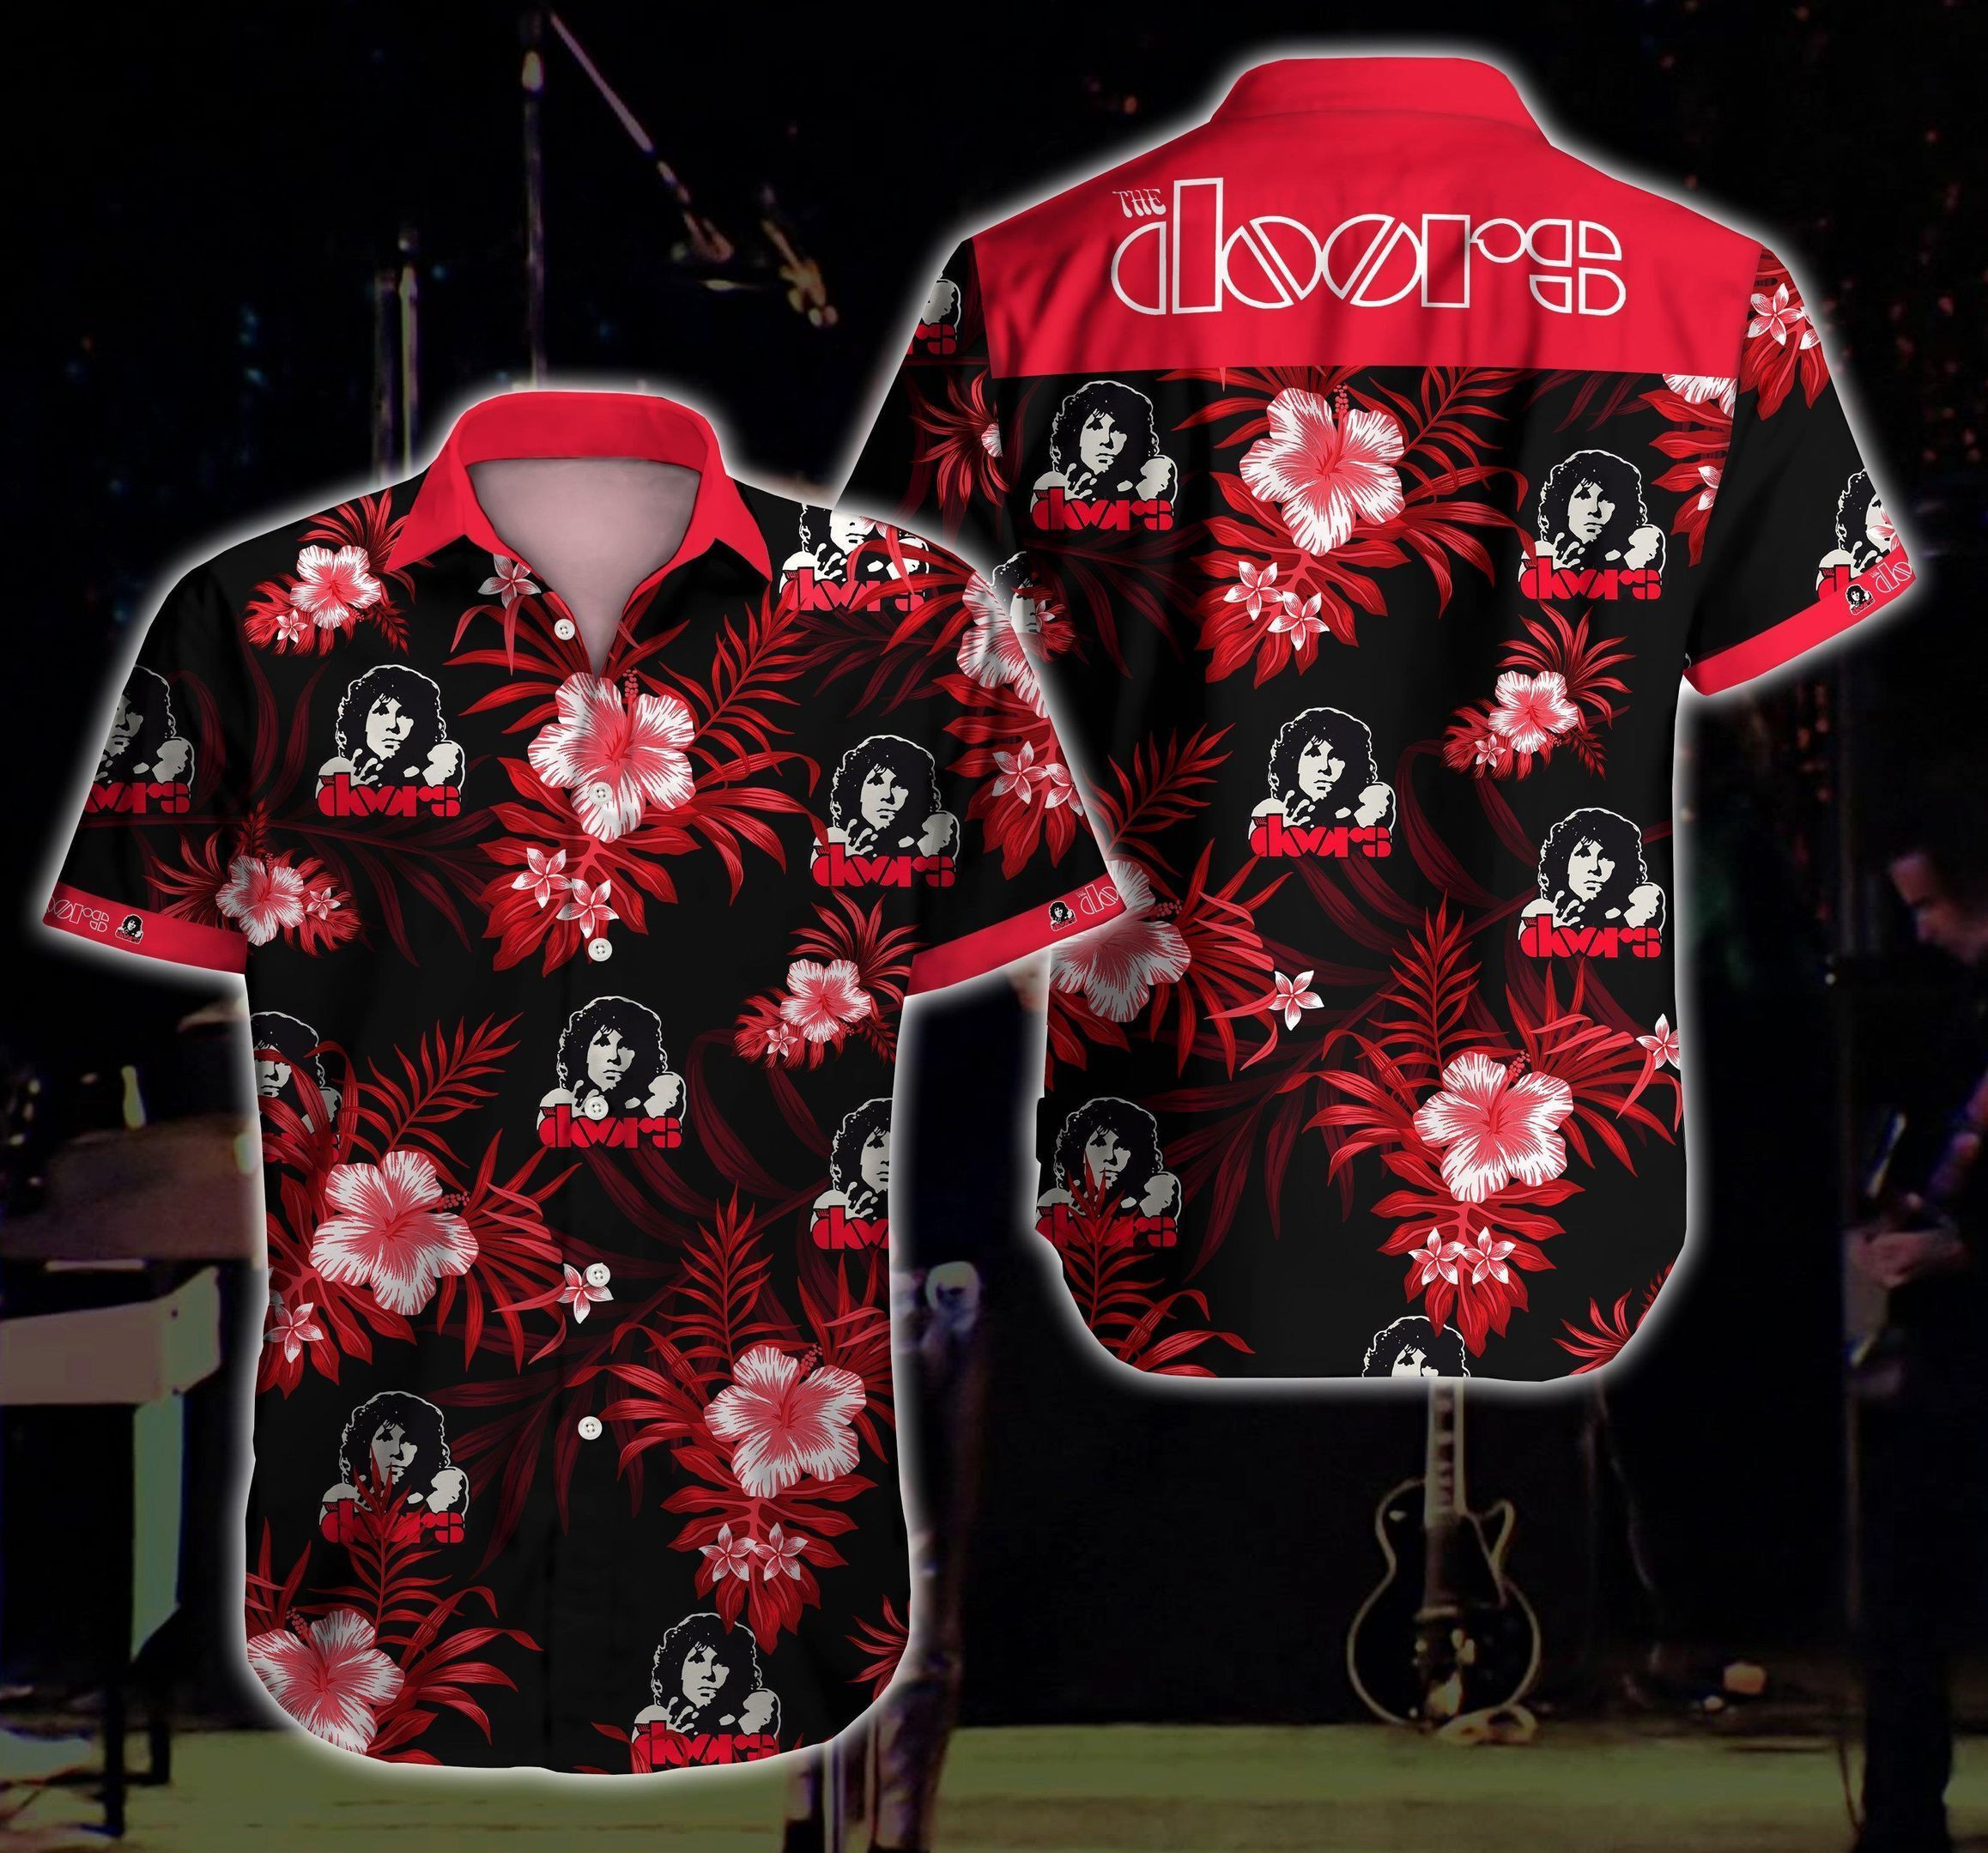 Choose from the many styles and colors to find your favorite Hawaiian Shirt below 205